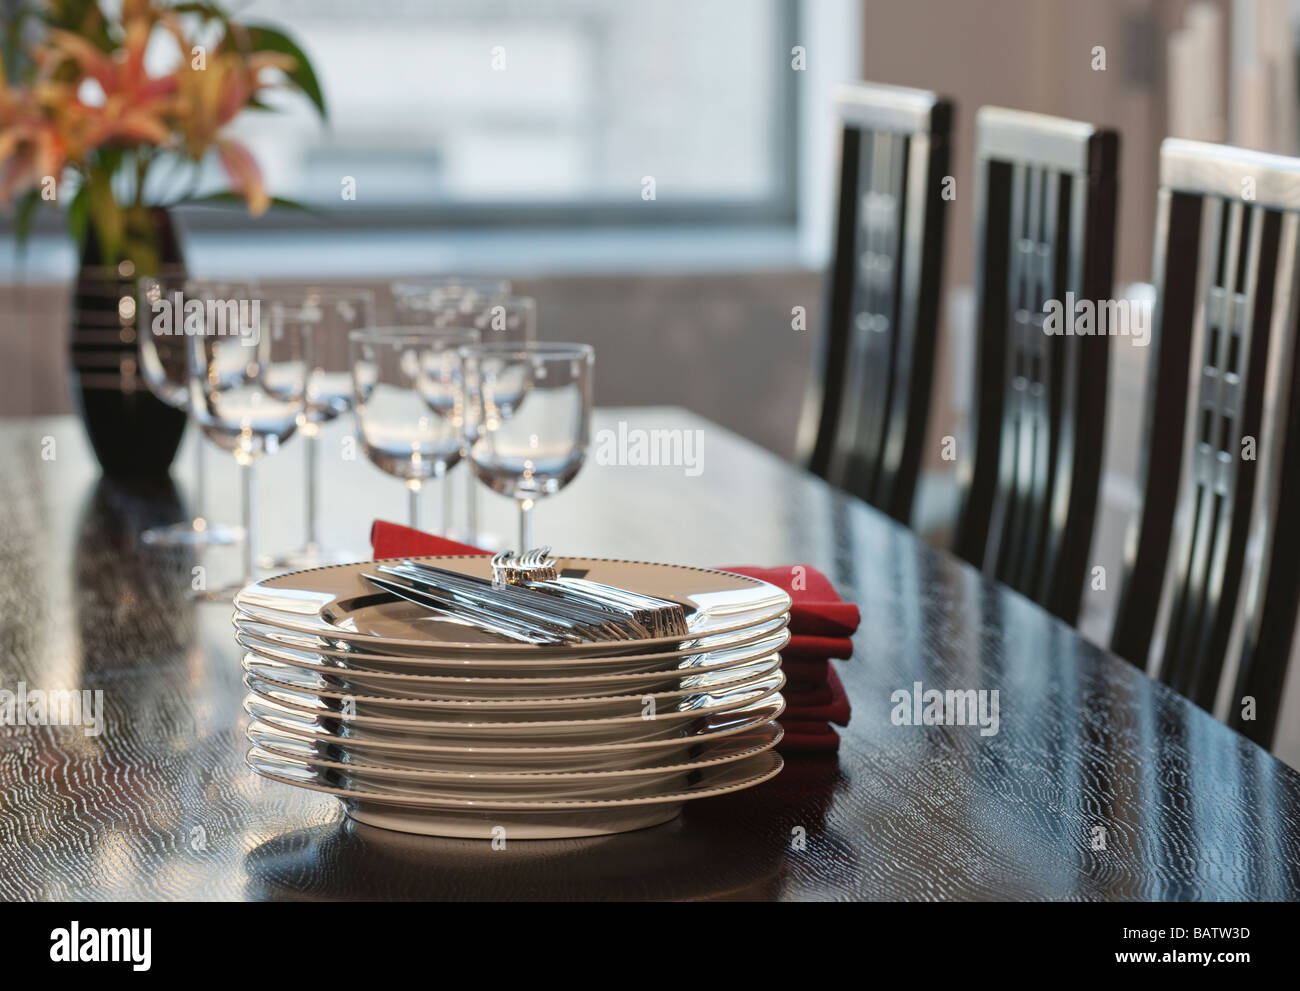 Stack of plates on table in dining room Stock Photo